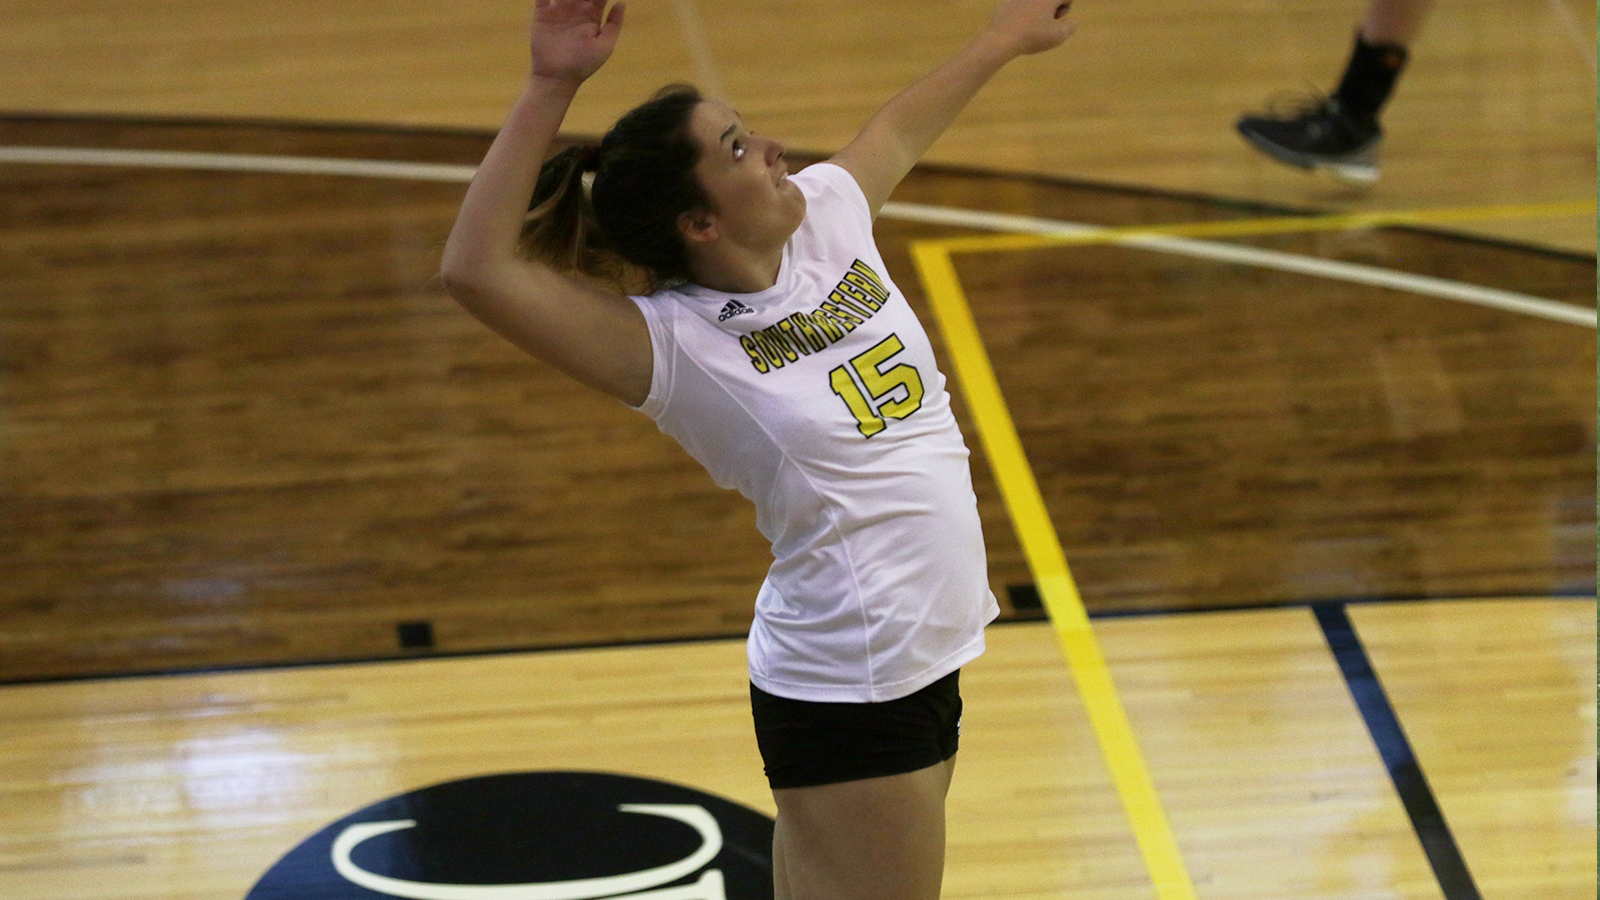 #2 Southwestern Wins Five Set Thriller Over TLU to Earn Saturday Sweep